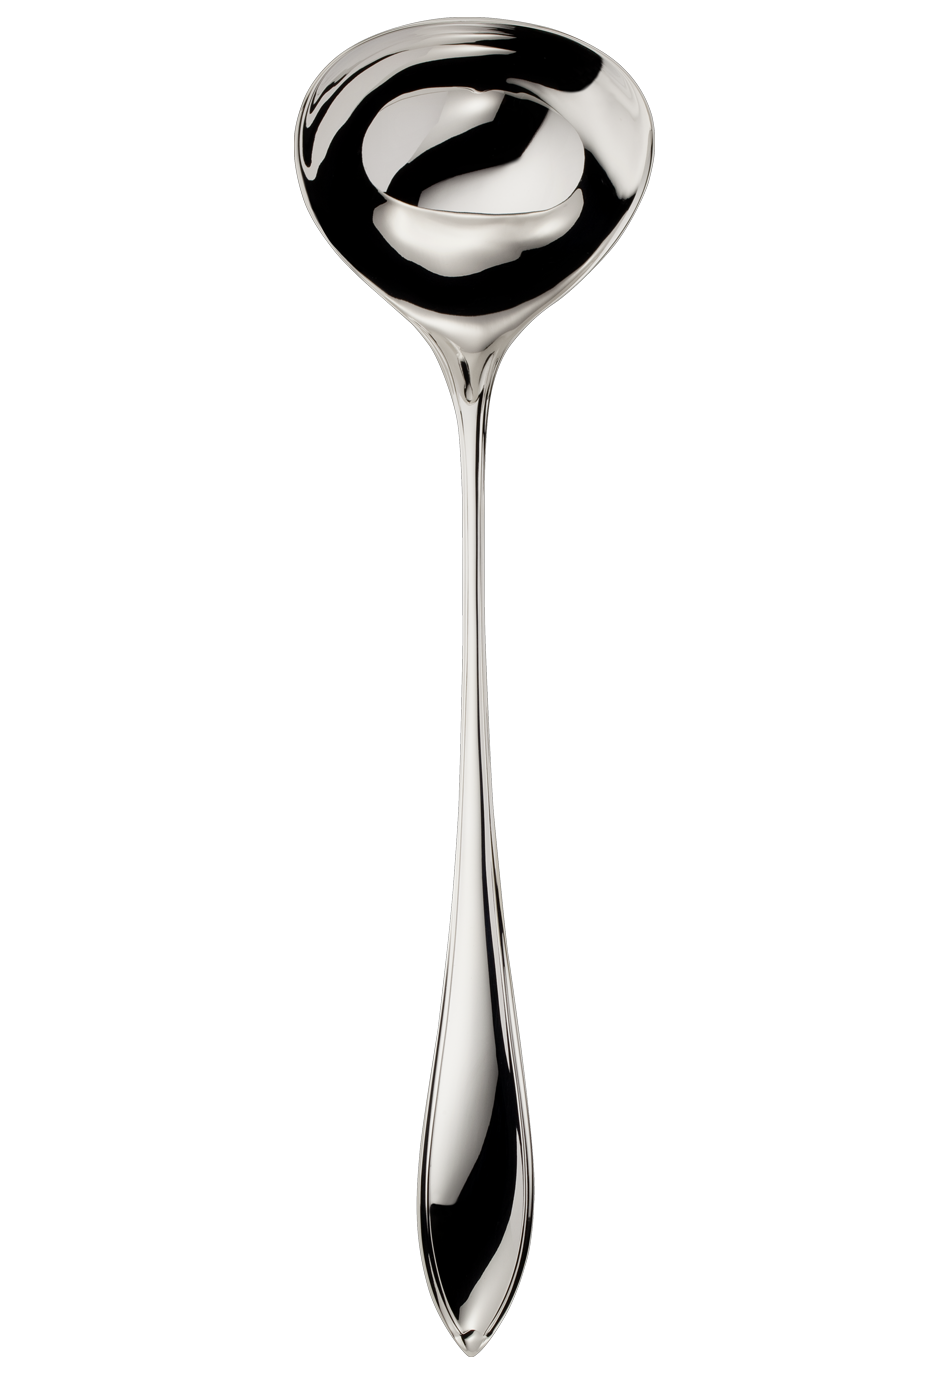 Navette Soup Ladle (150g massive silverplated)